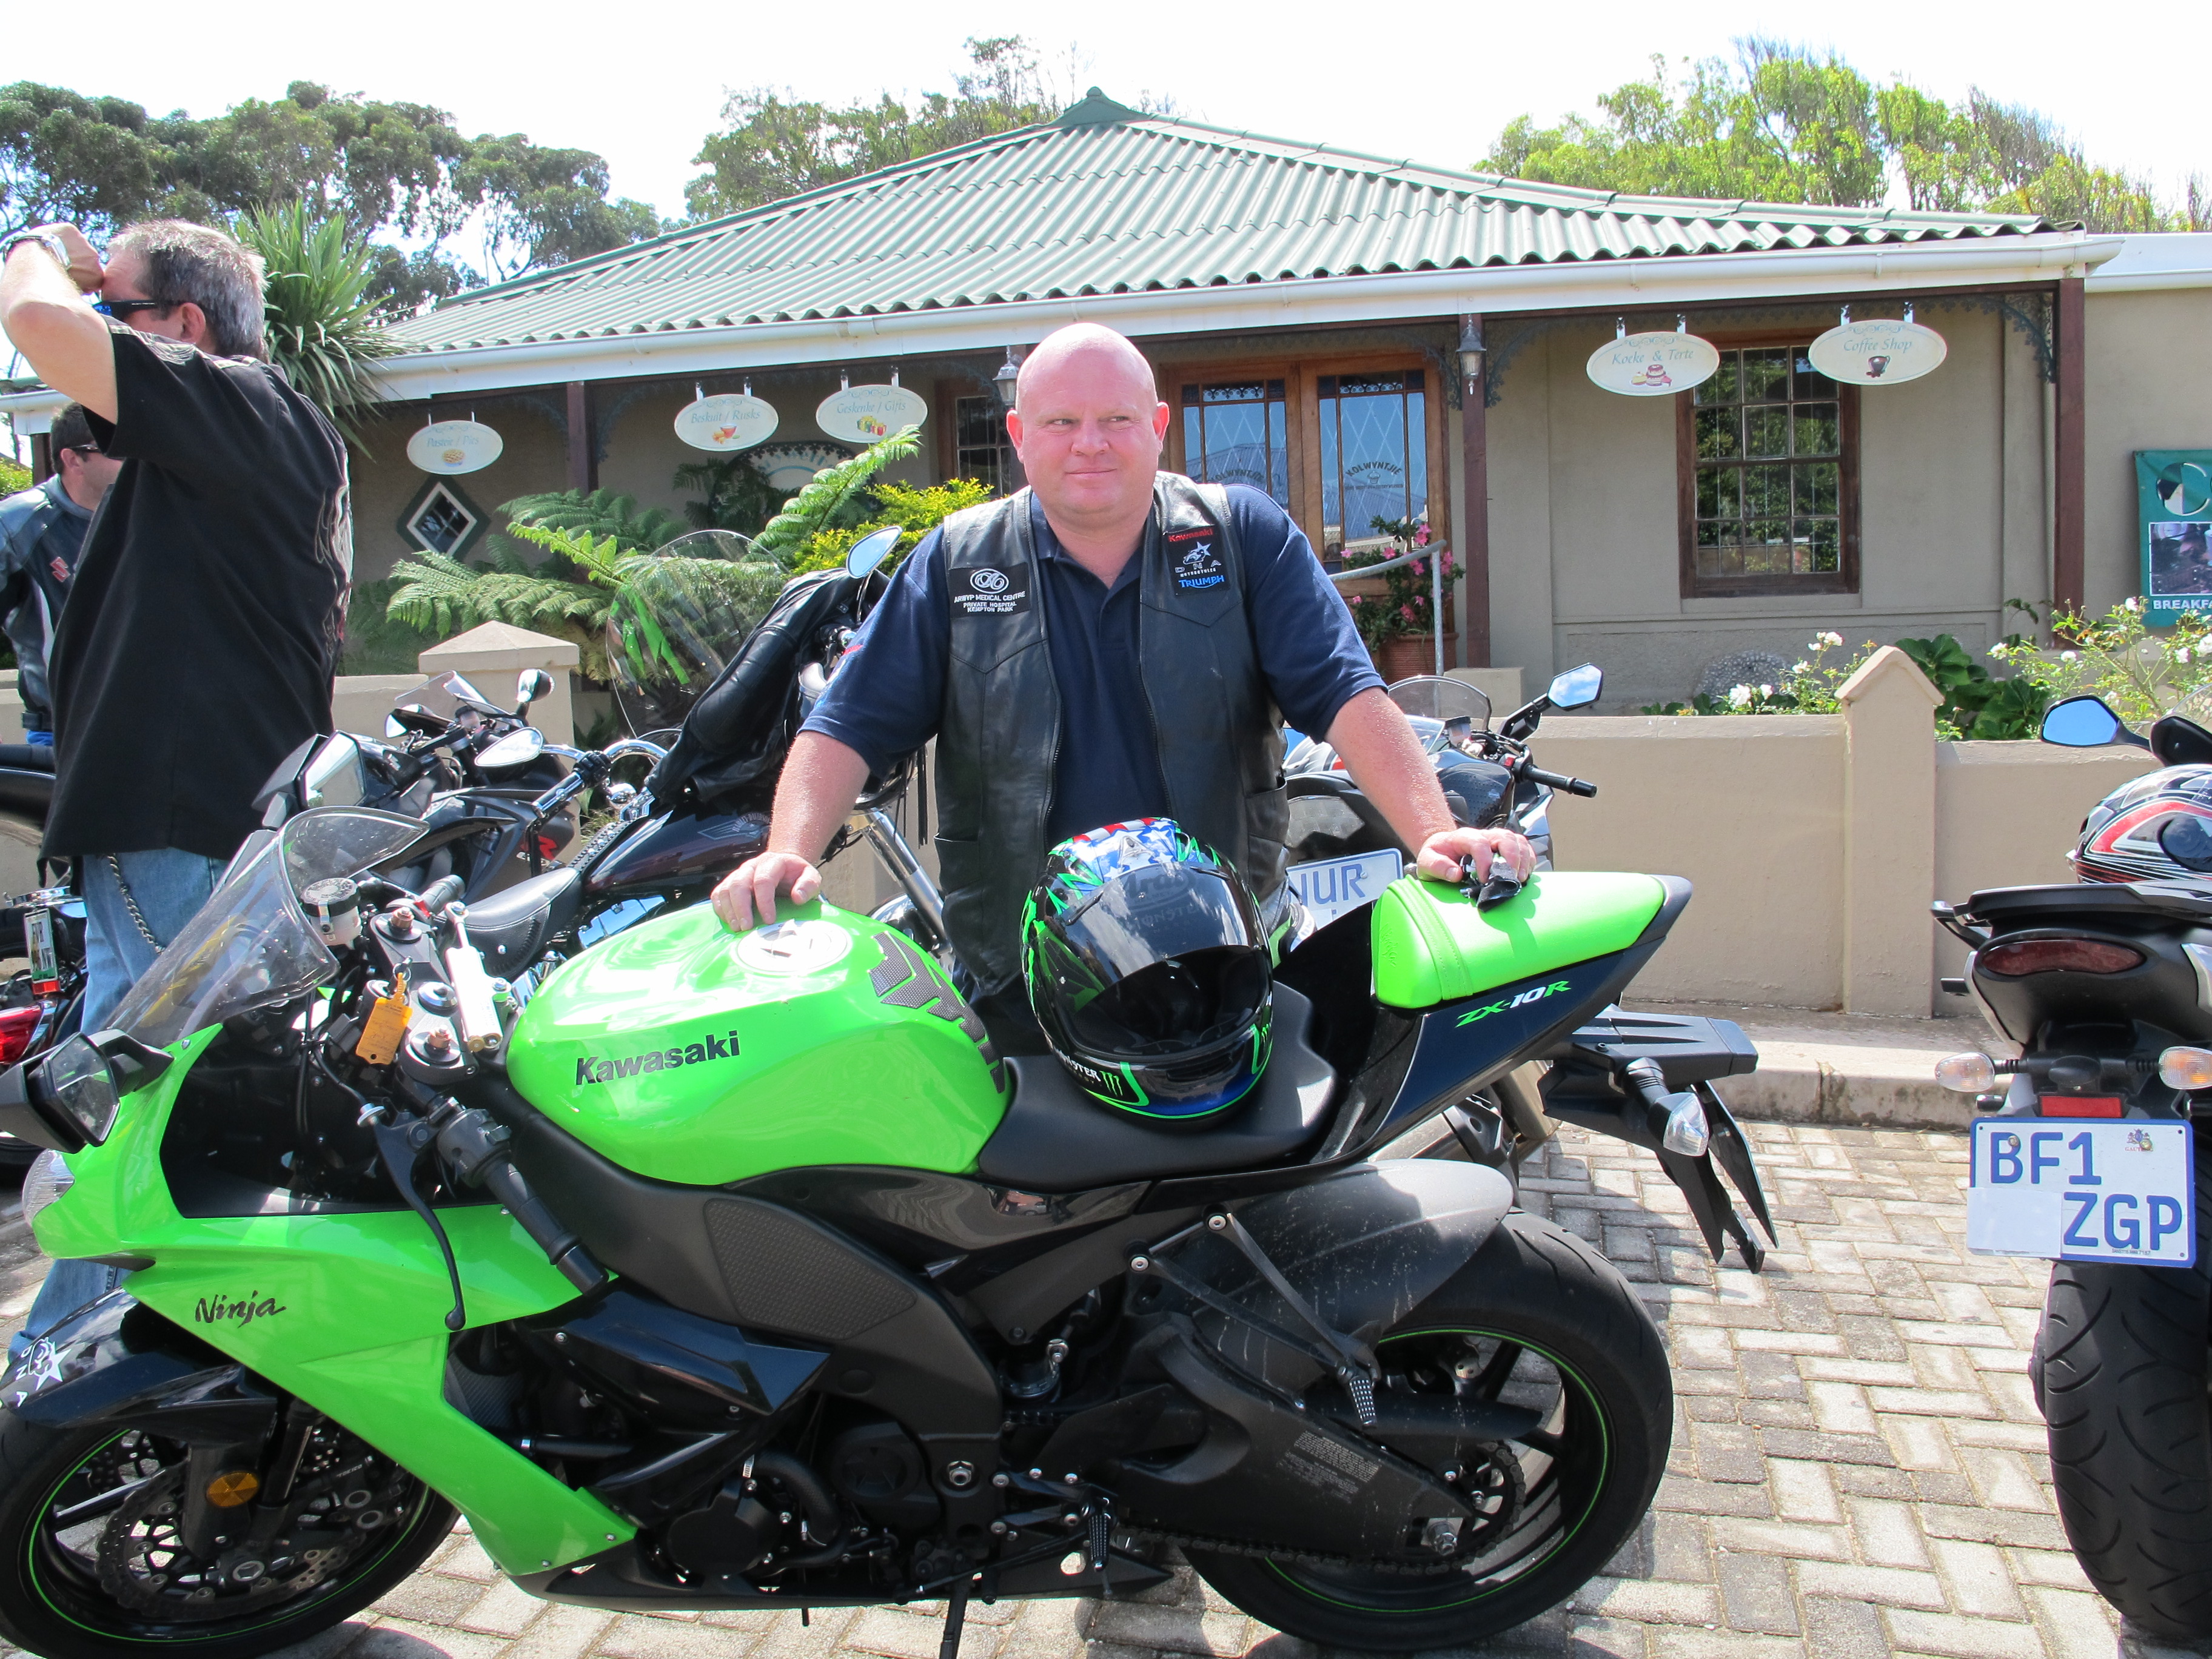 wordriders | On the road with the KJV400 motorbike tour